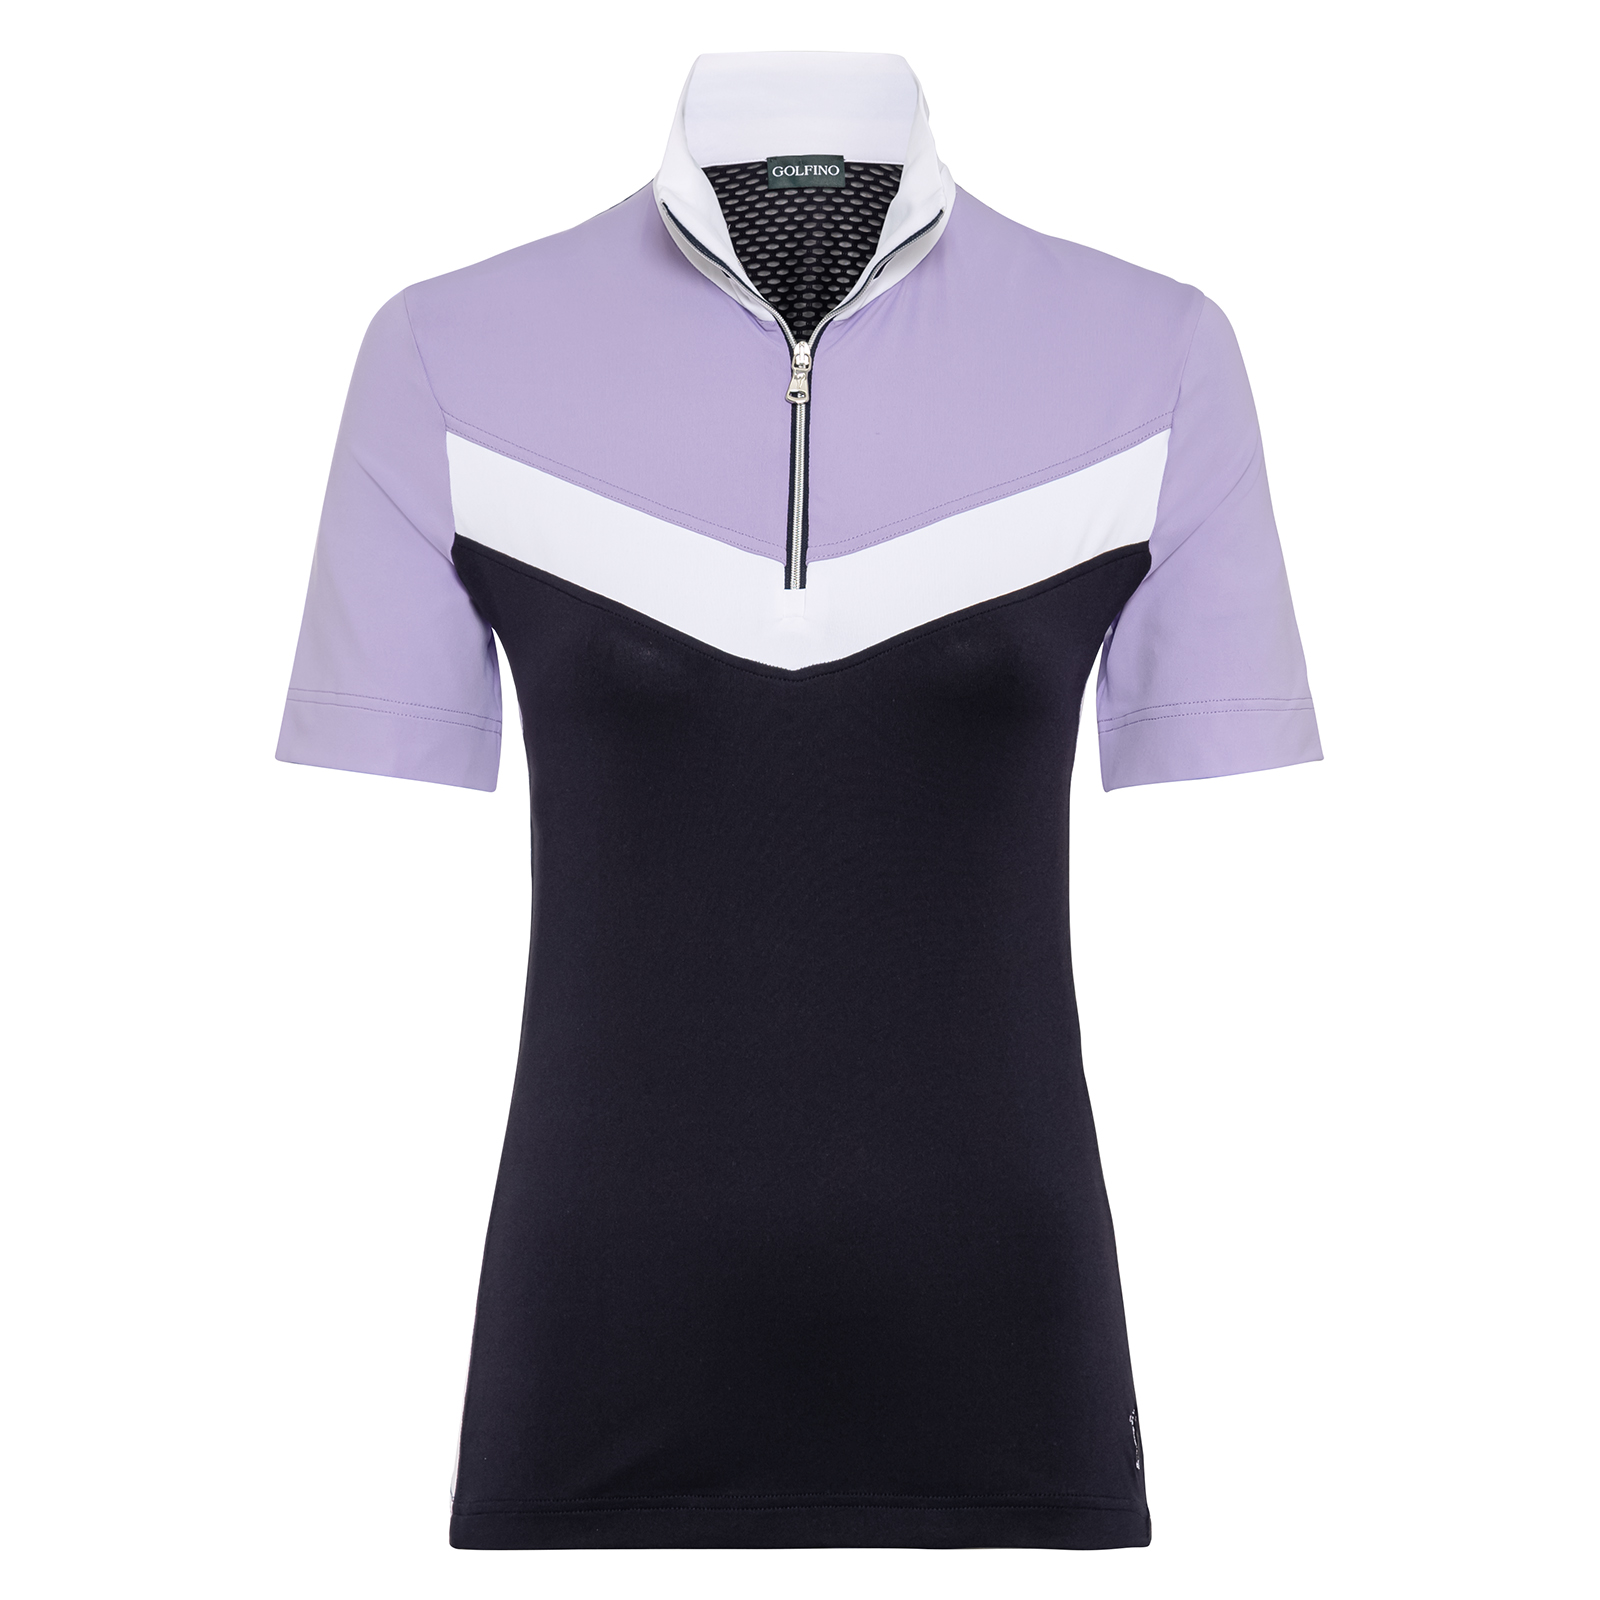 Ladies' golf shirt with breathable mesh insert 